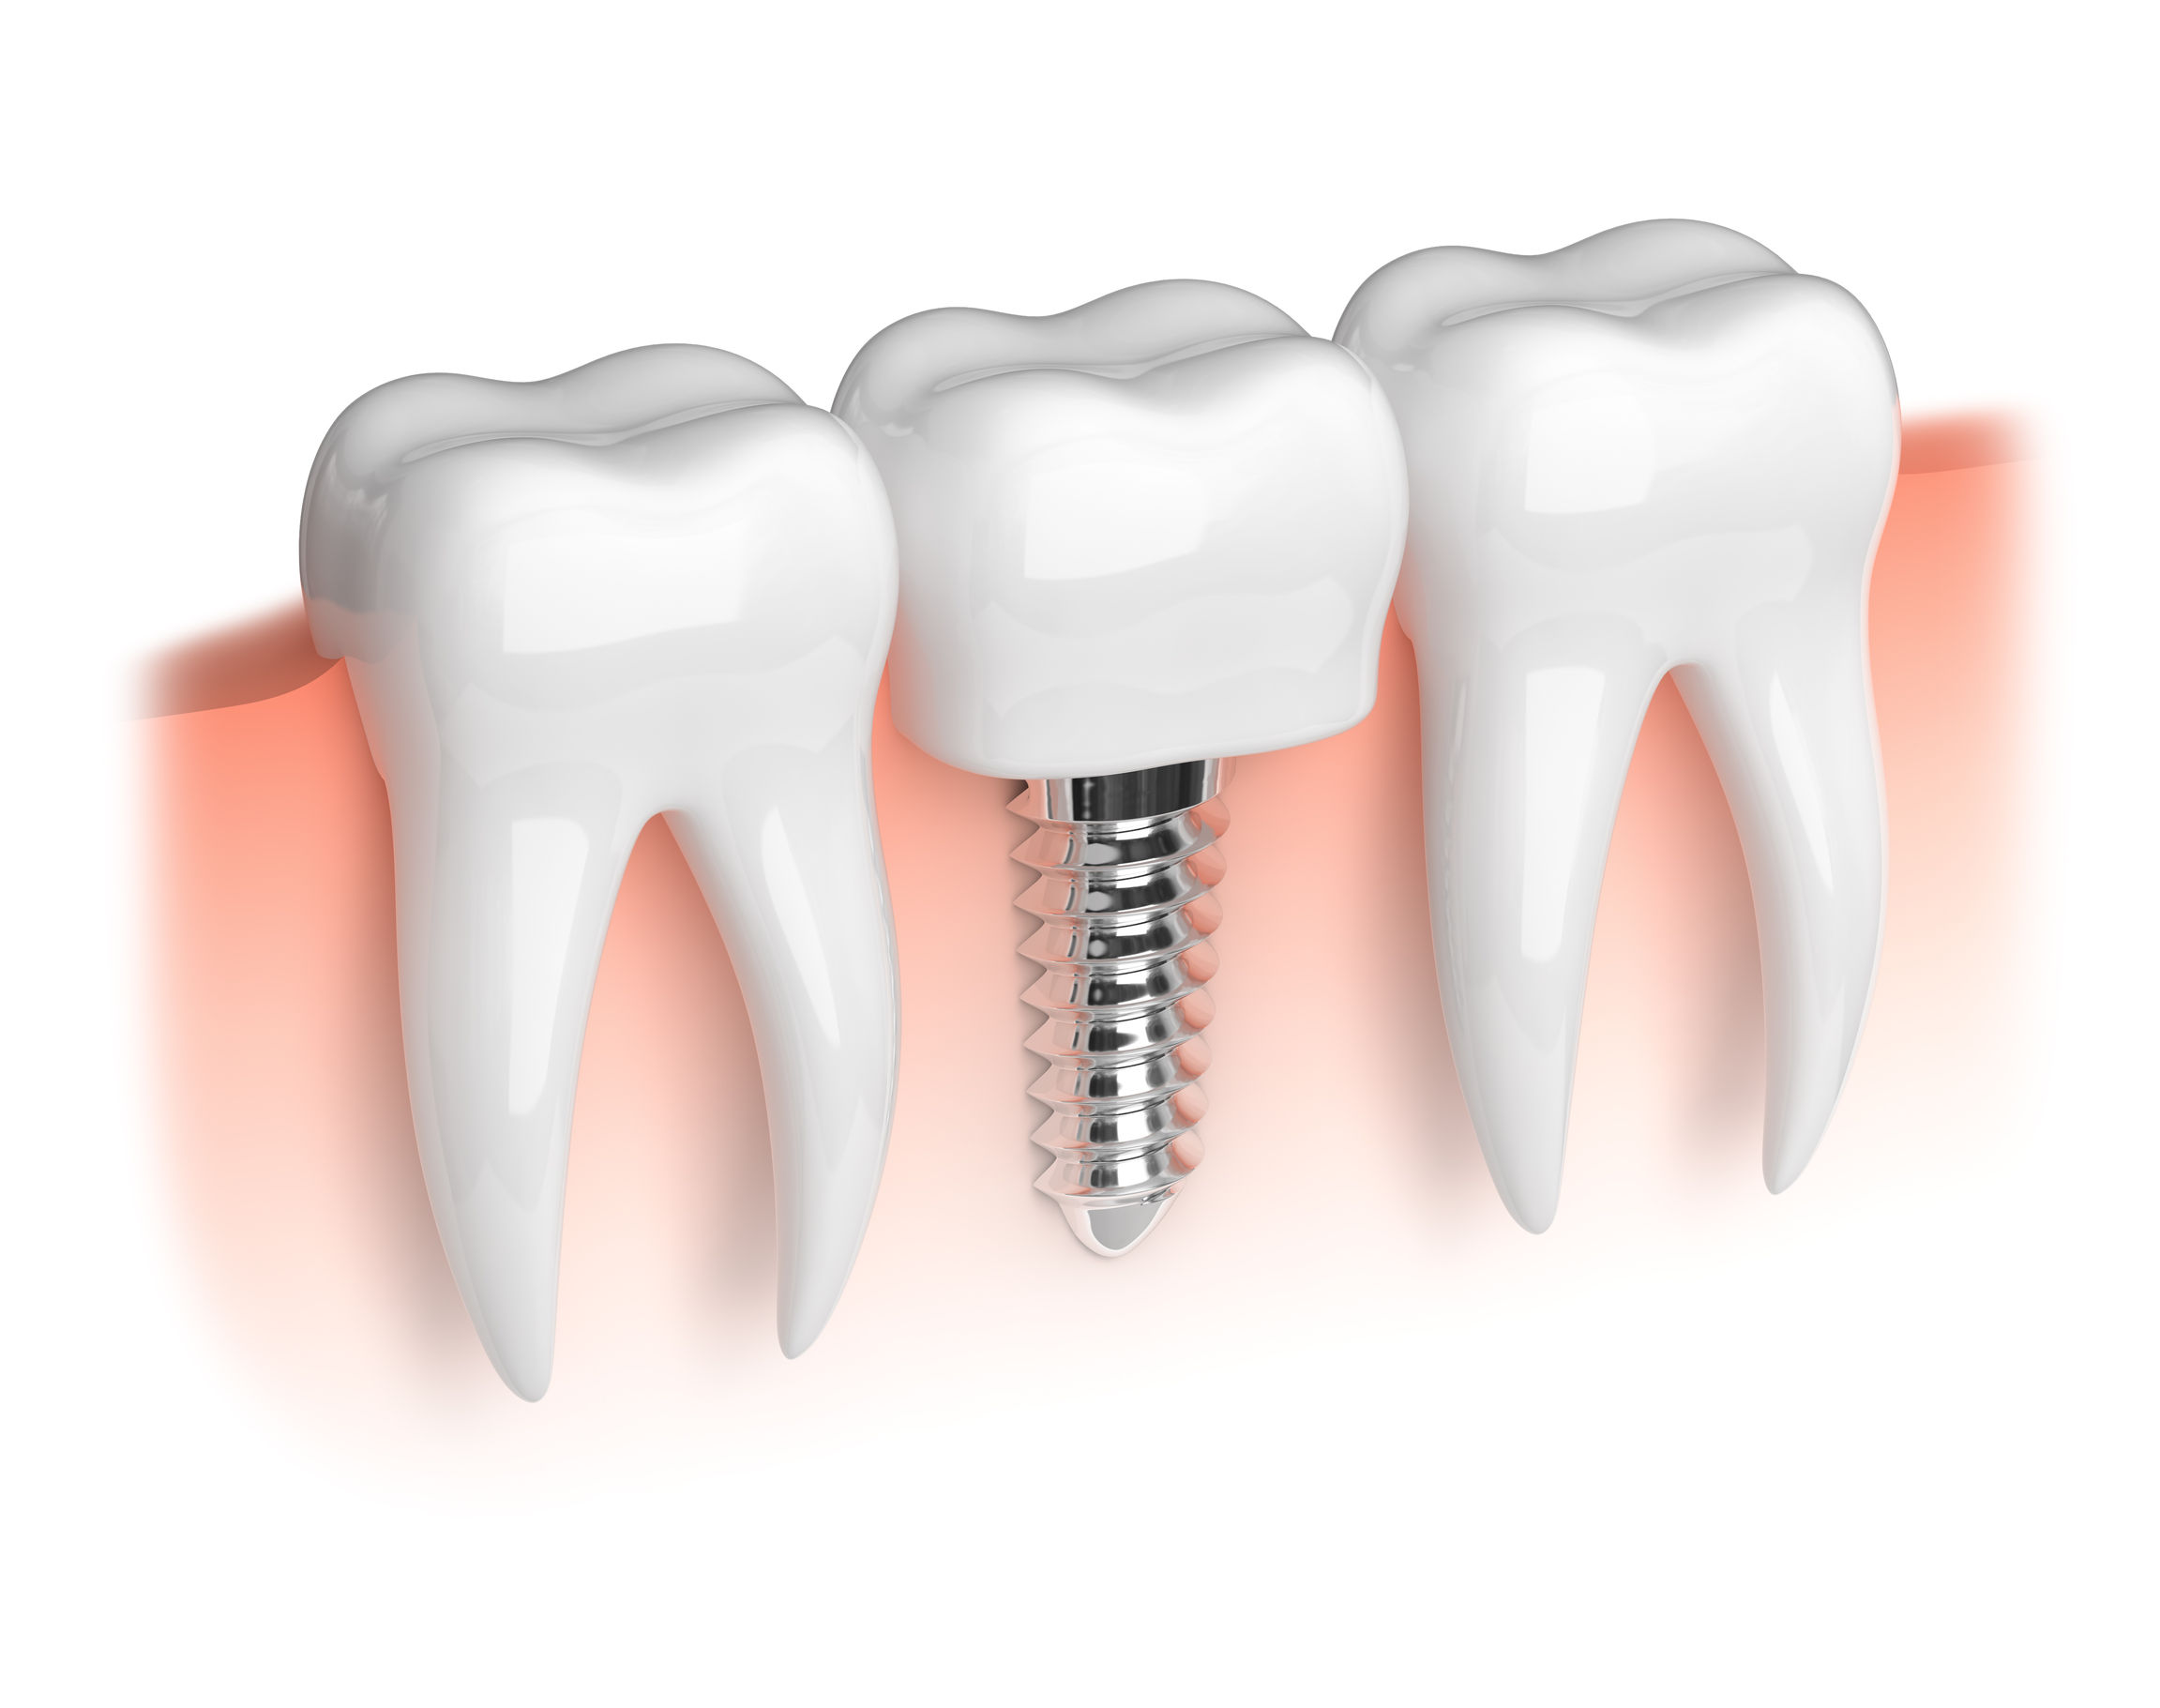 Where can I find Peoria dental implants?